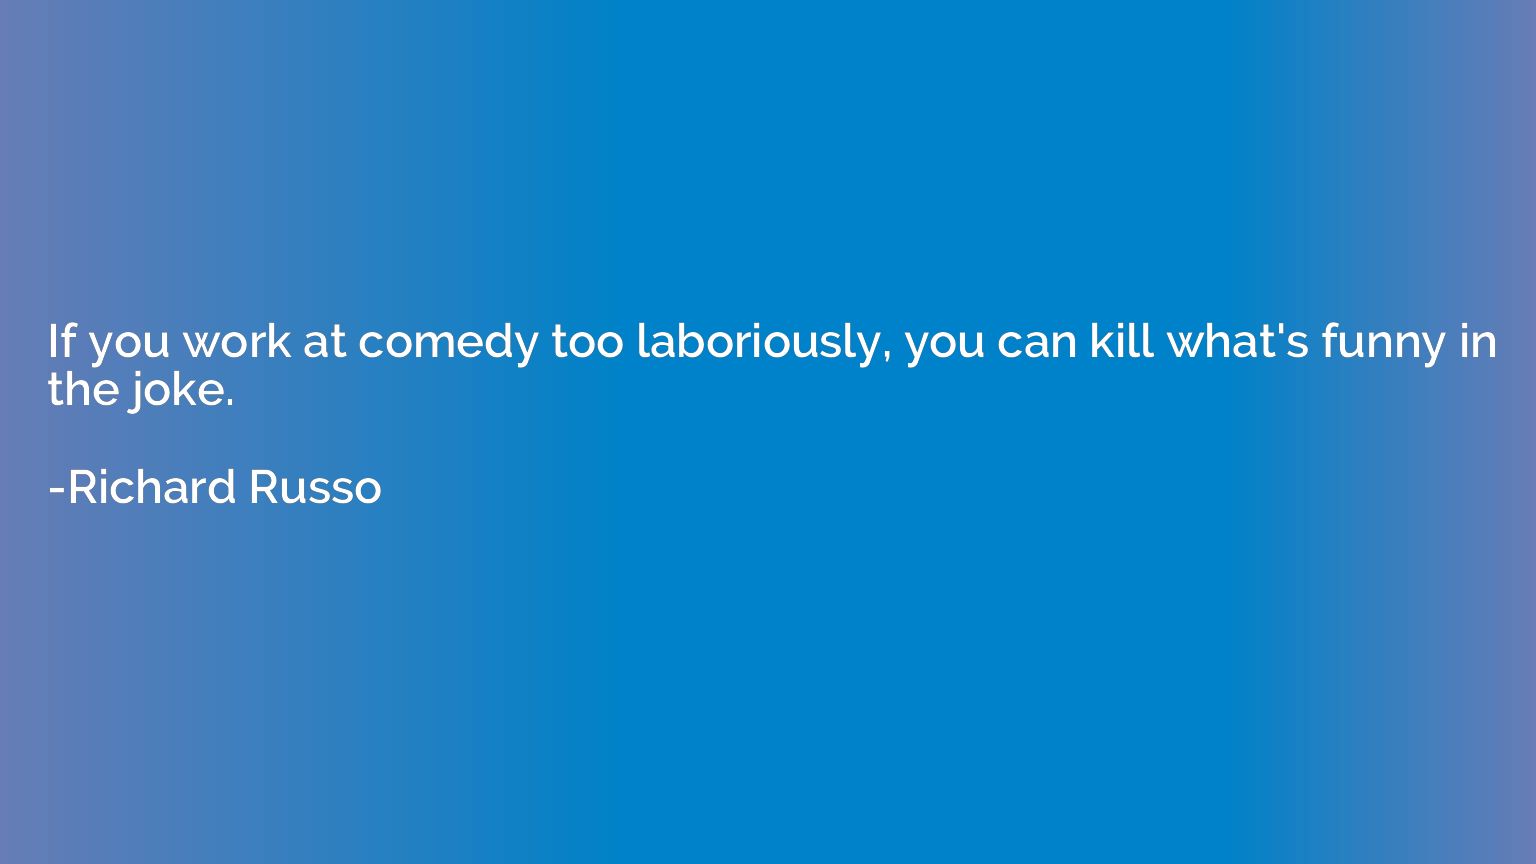 If you work at comedy too laboriously, you can kill what's f